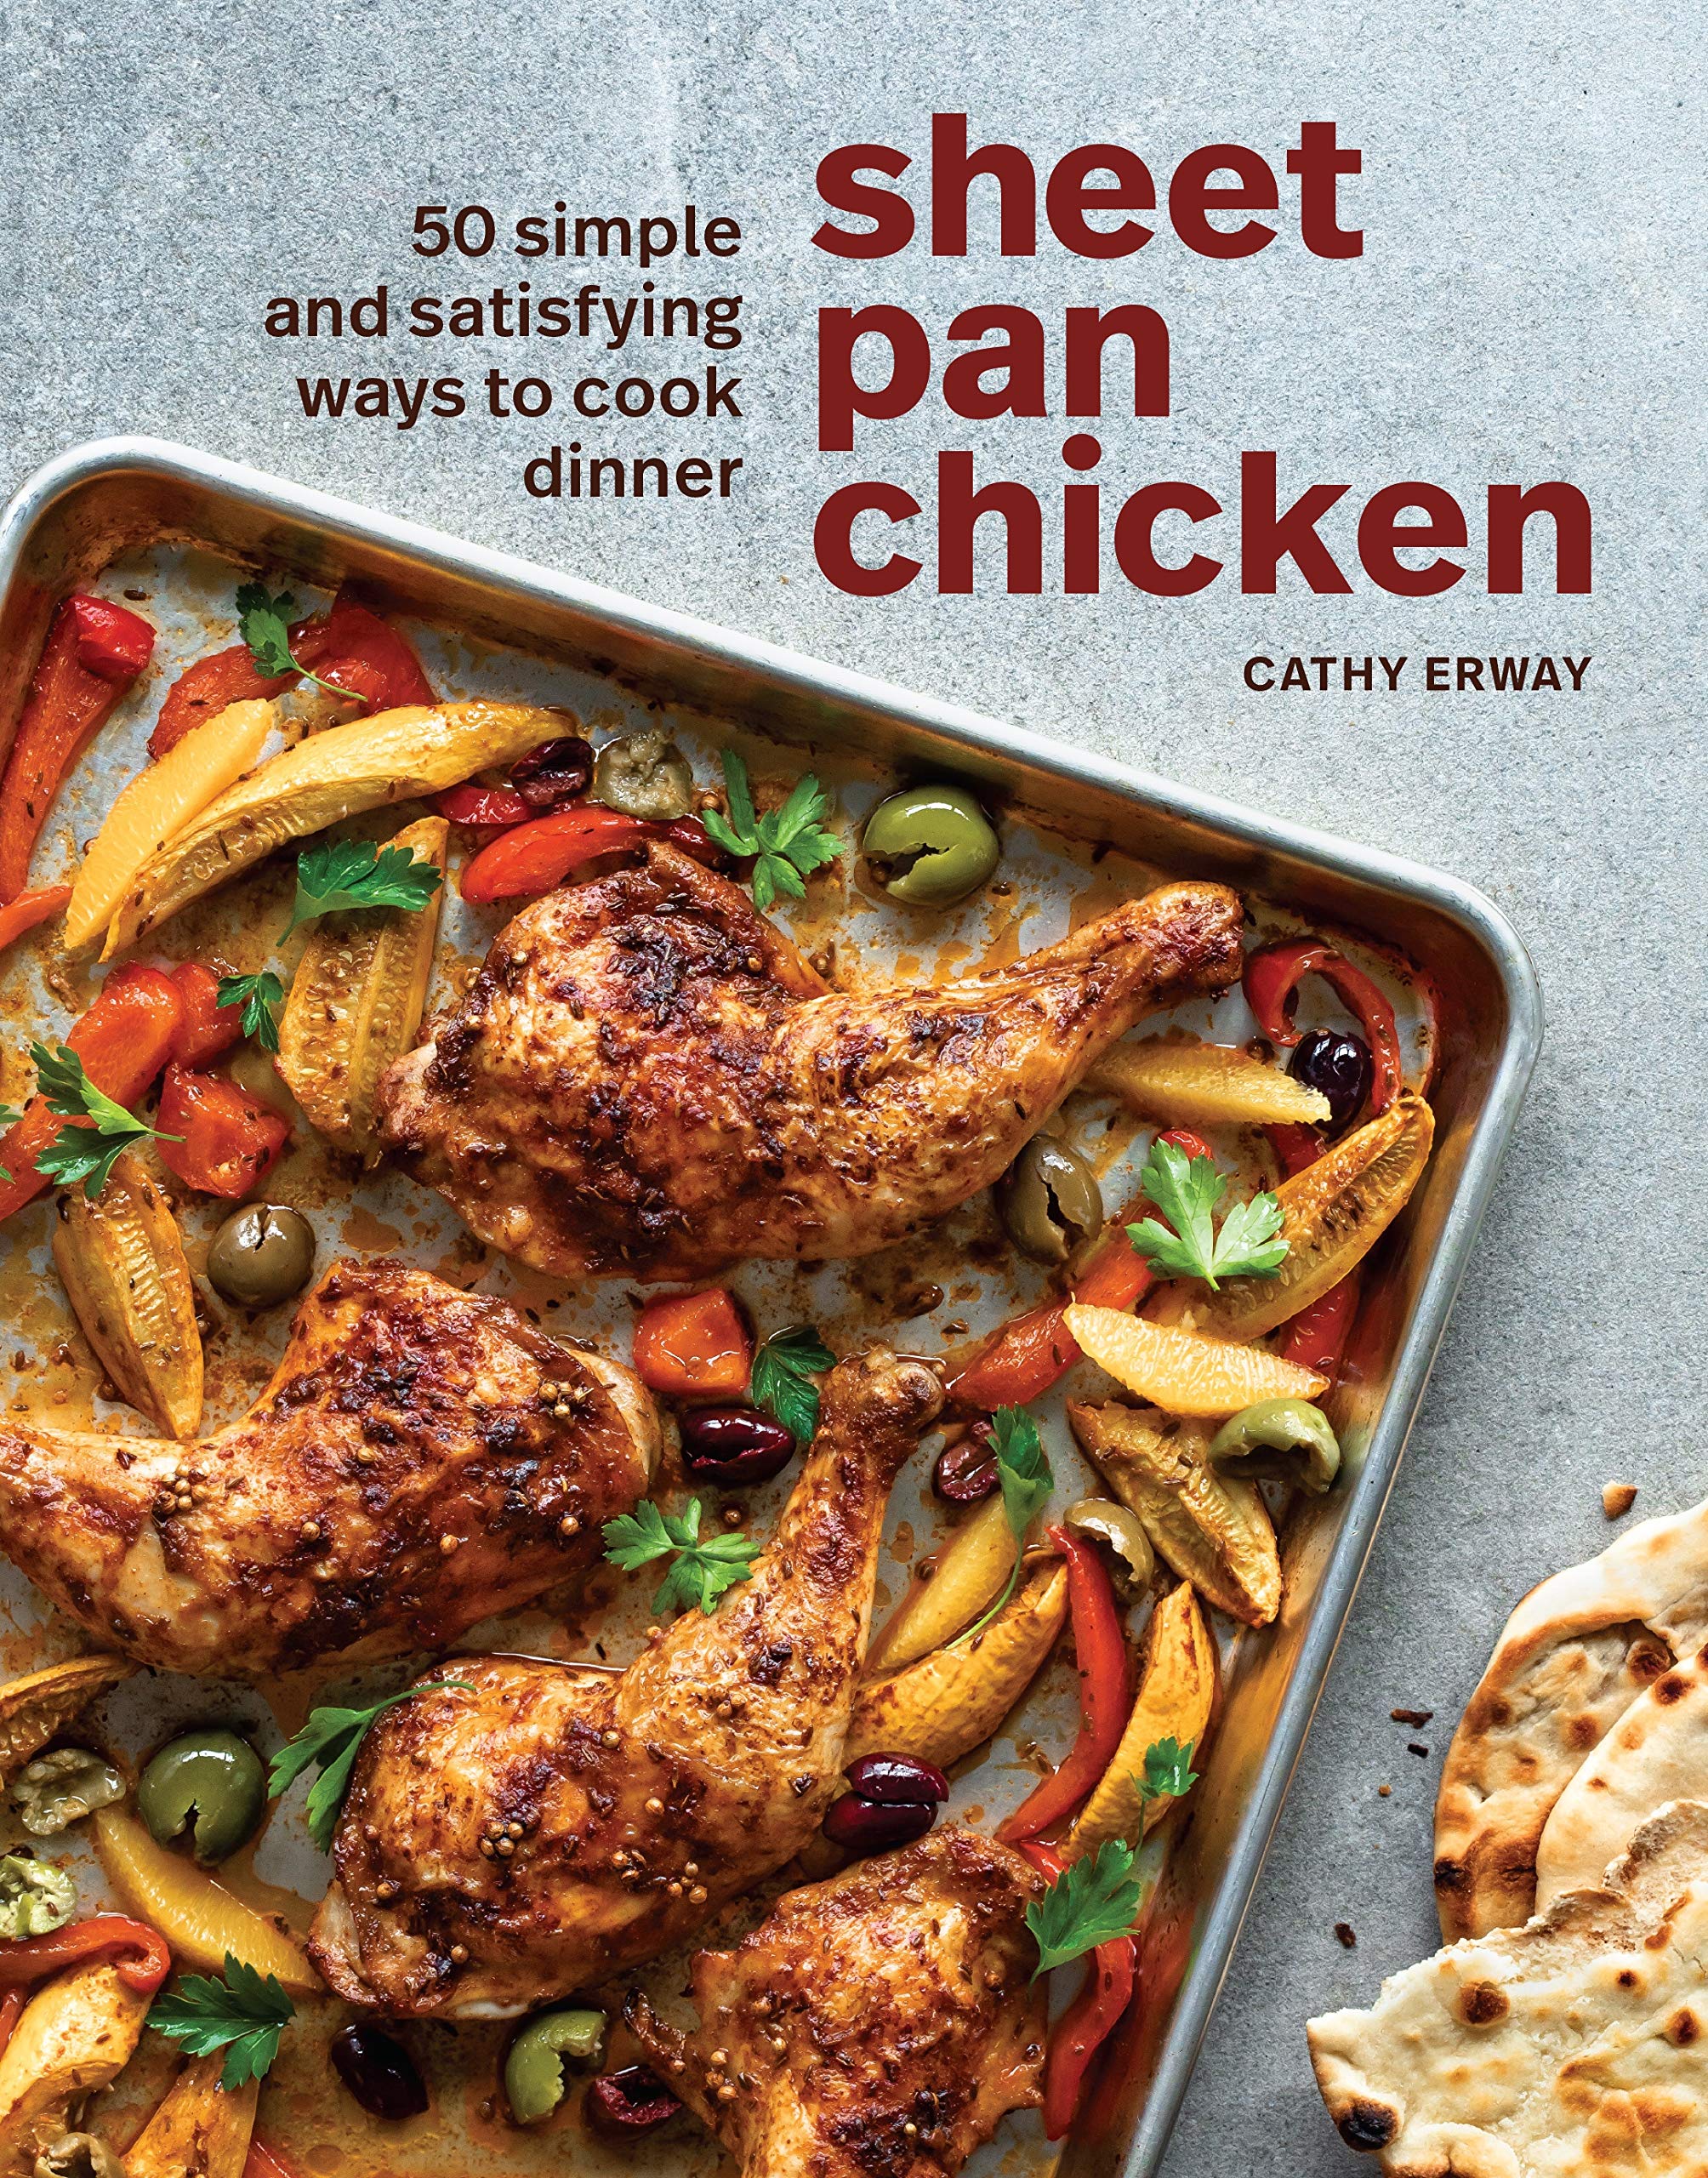 Sheet Pan Chicken: 50 Simple and Satisfying Ways to Cook Dinner (Cathy Erway)